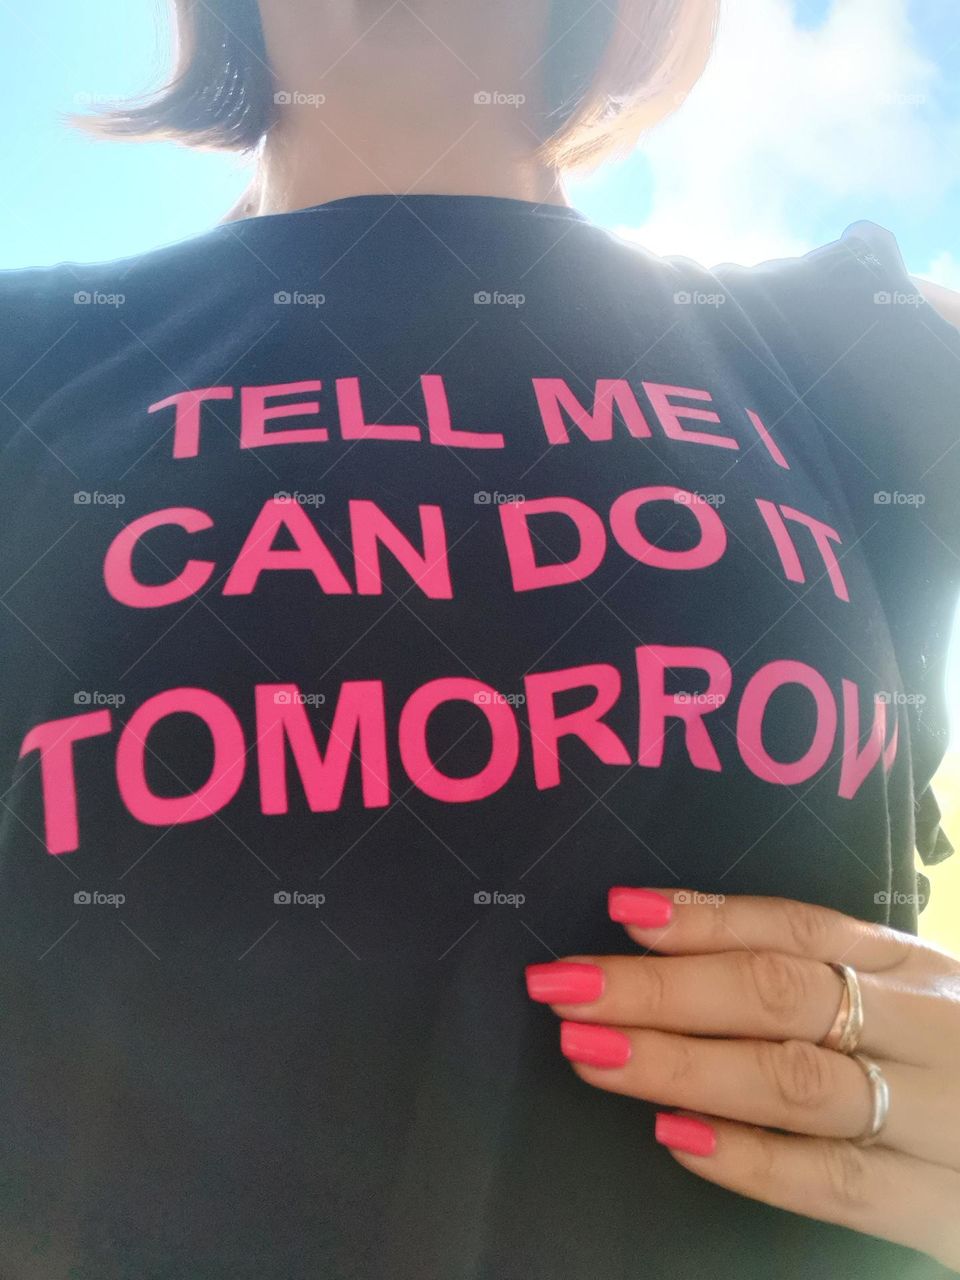 "Tell me I can do it tomorrow..." Pink nails, pink words.